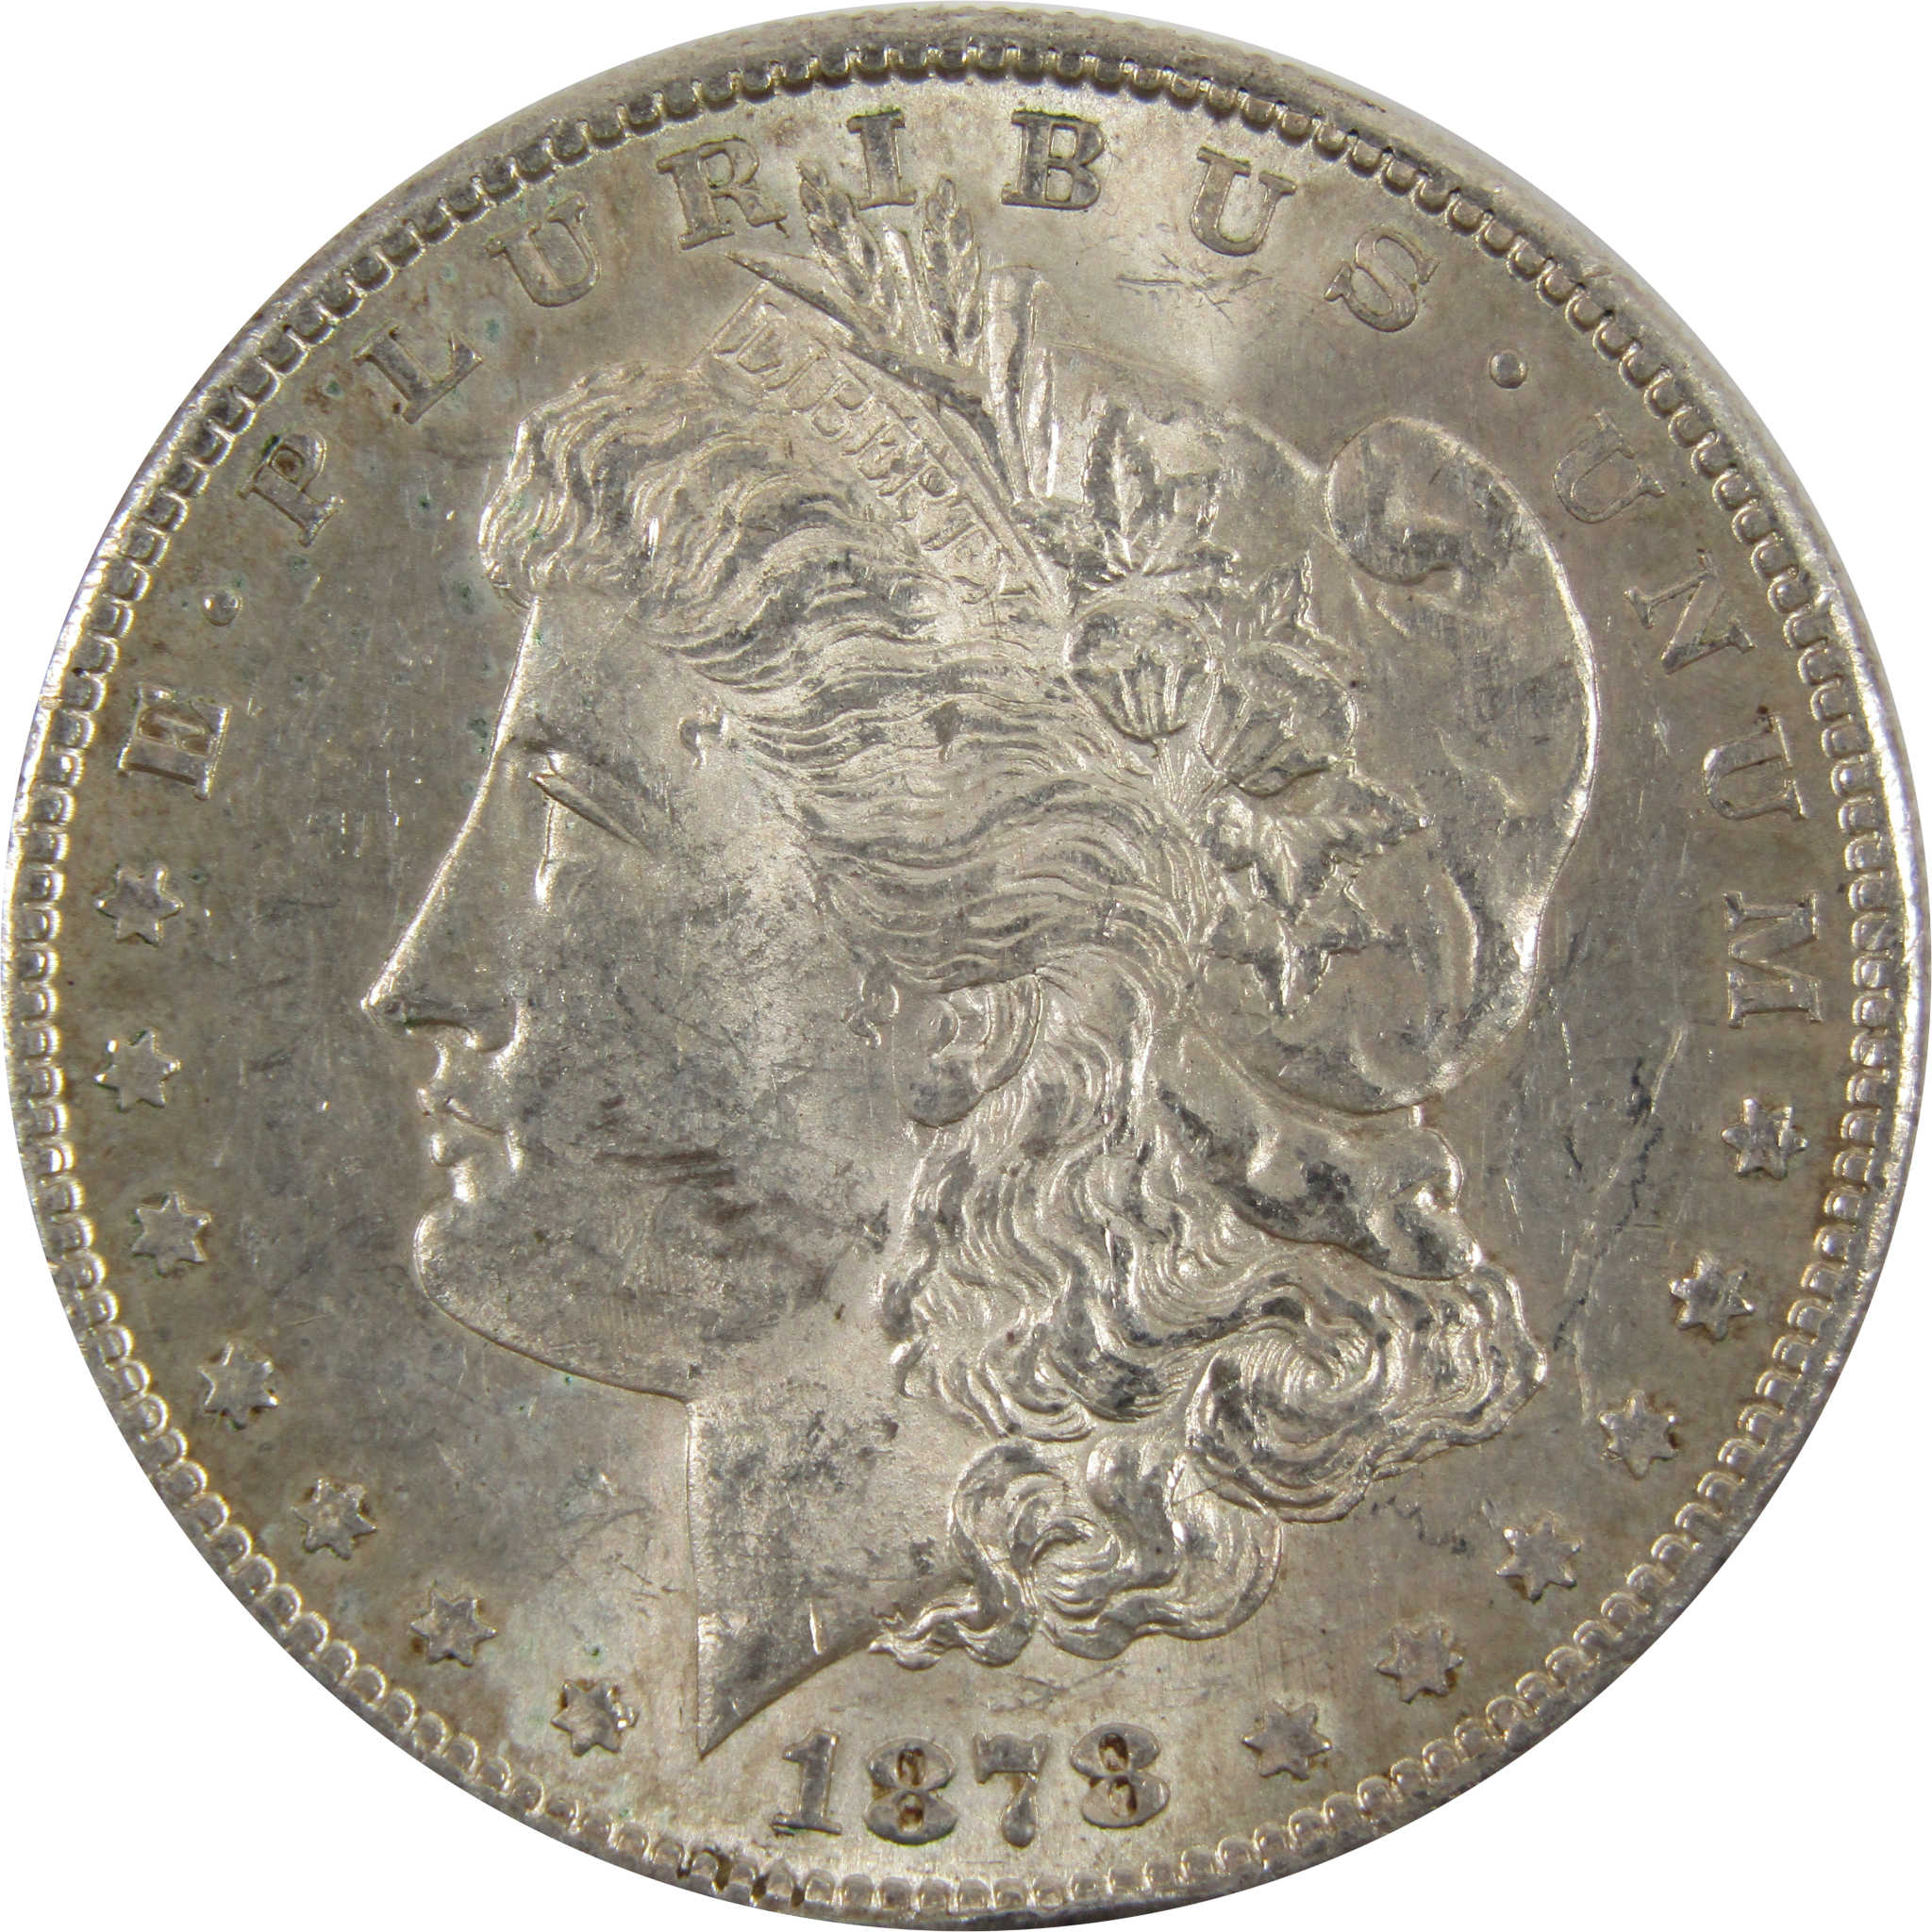 1878 S Morgan Dollar Extremely Fine 90% Silver SKU:I7625 - Morgan coin - Morgan silver dollar - Morgan silver dollar for sale - Profile Coins &amp; Collectibles